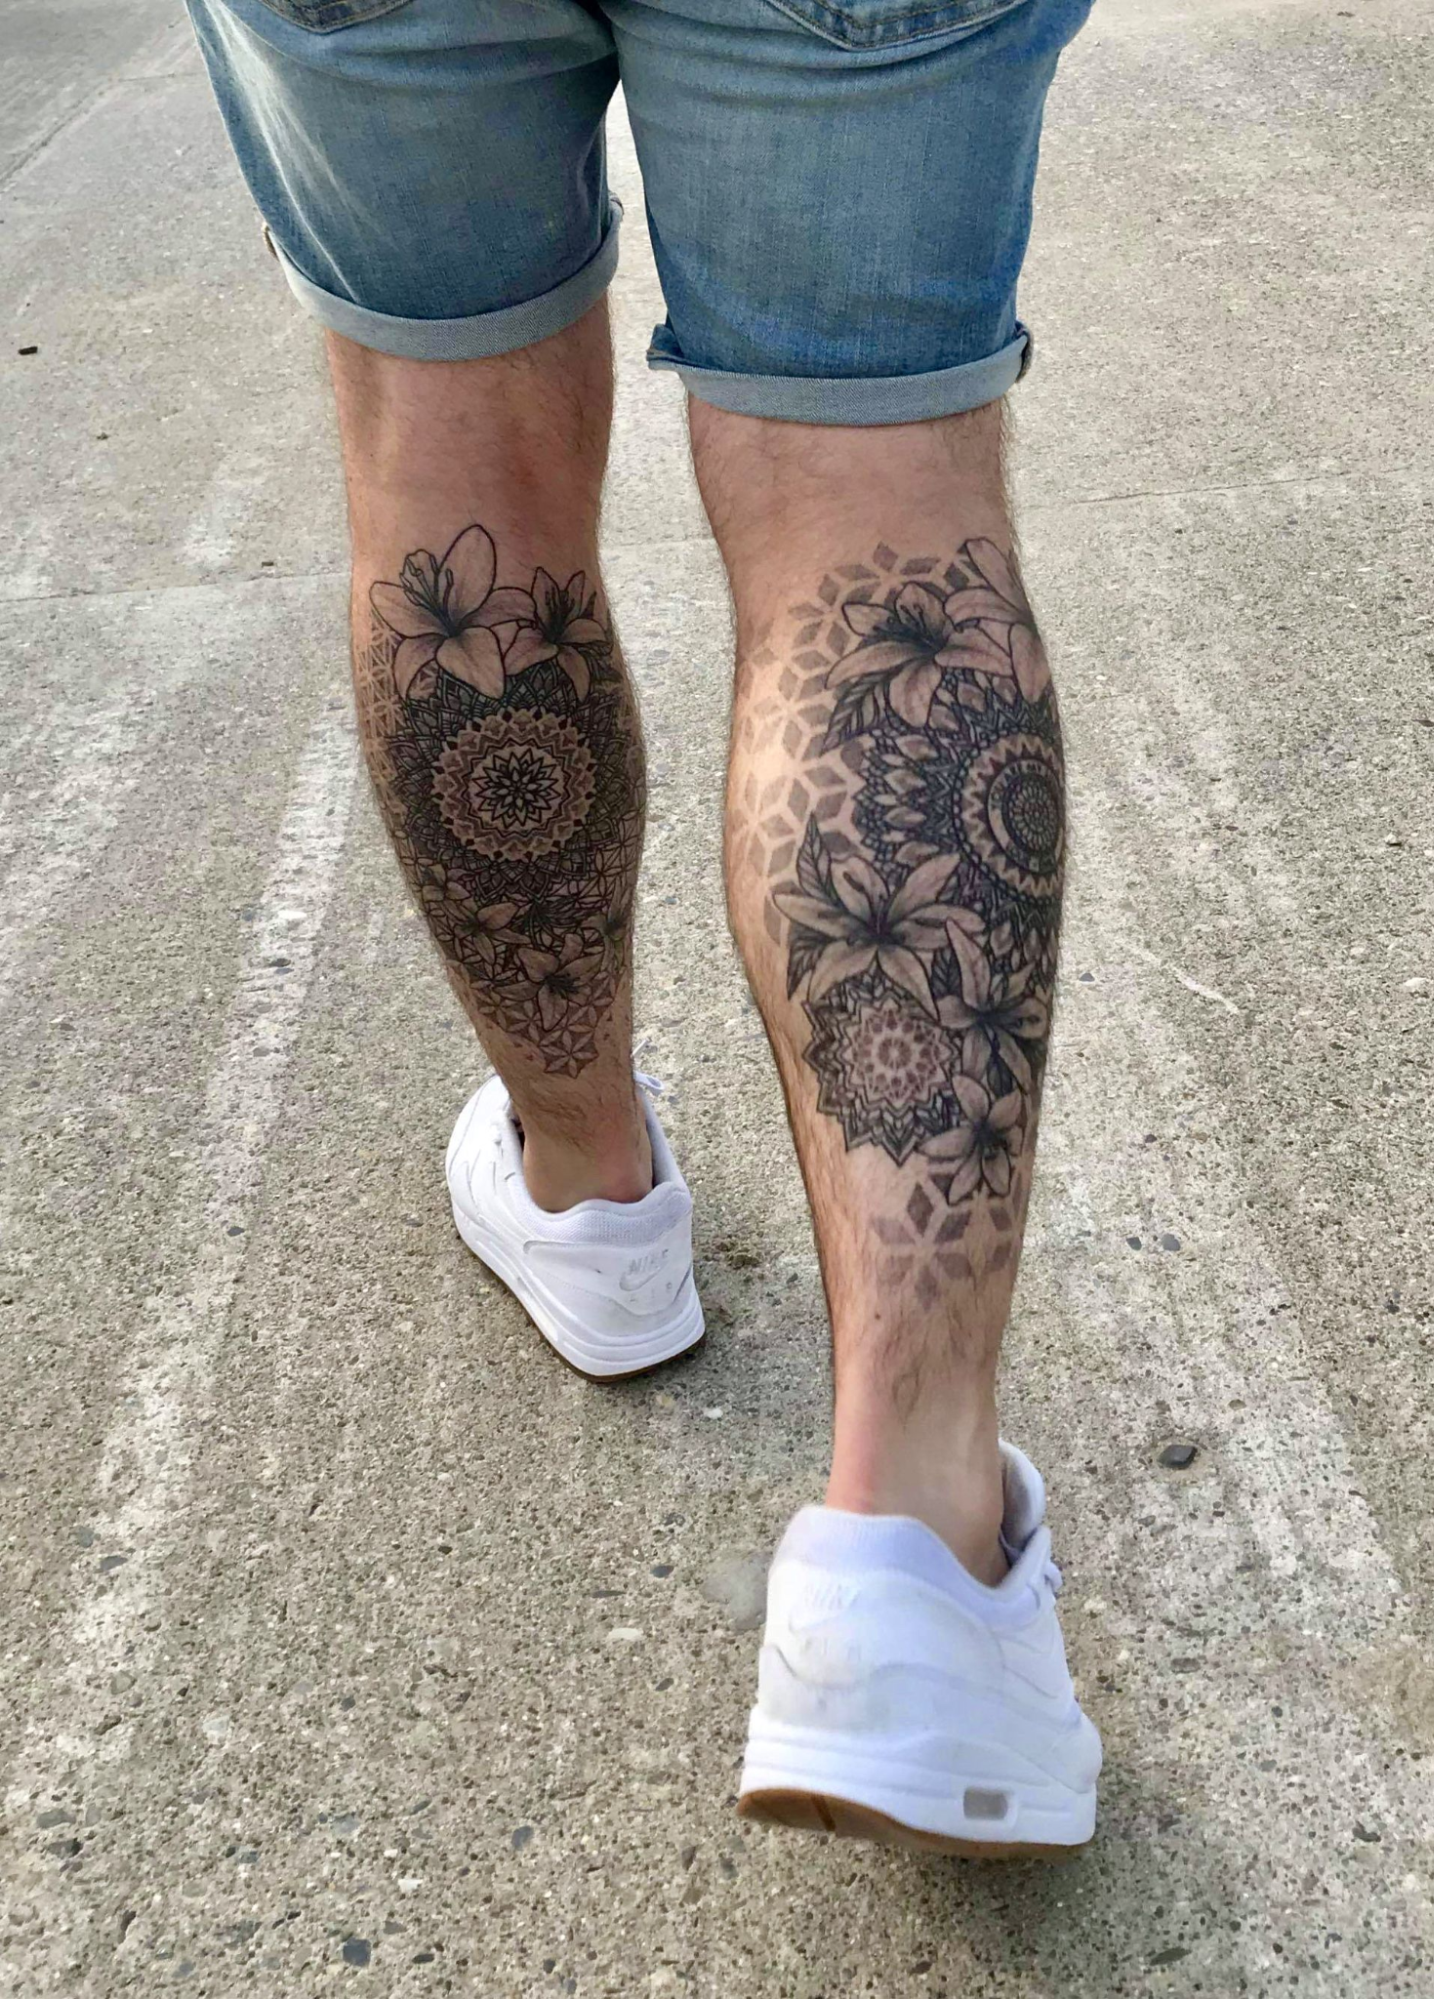 16 Amazing Tattoos That Are Living Works Of Art  Leg sleeve tattoo Best leg  tattoos Leg tattoo men